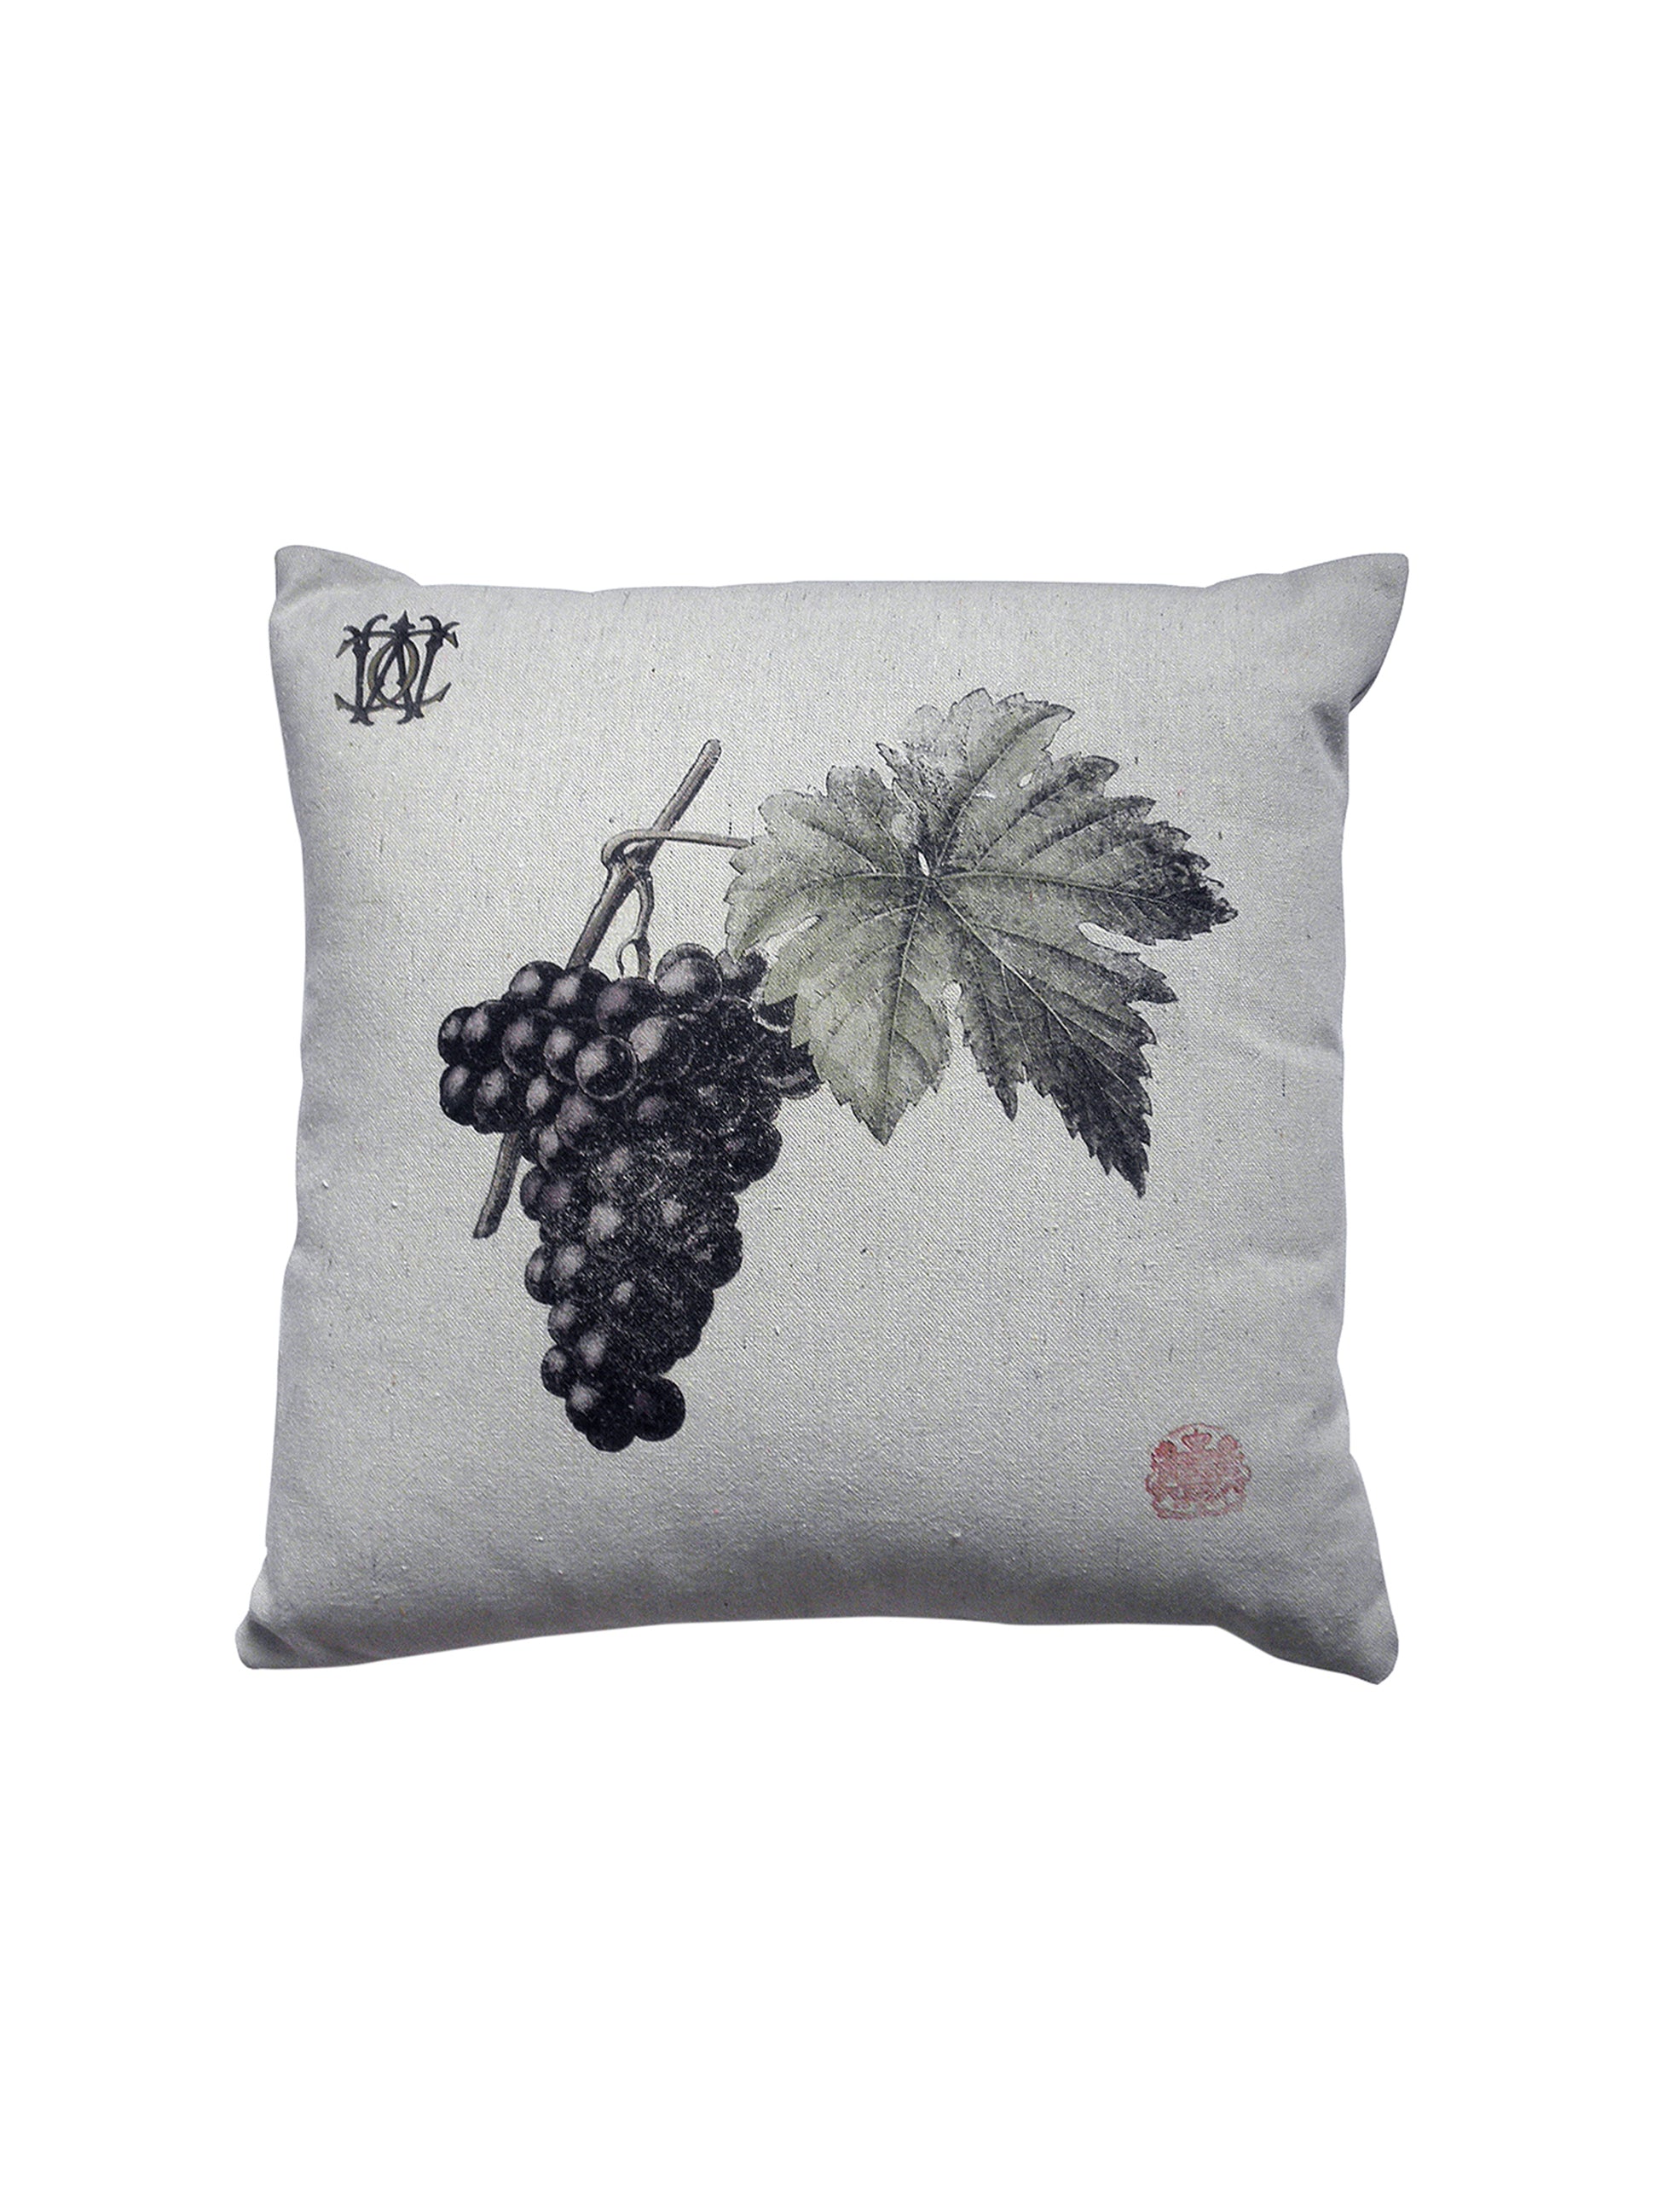 Whim & Caprice Grapes Pillow Weston Table